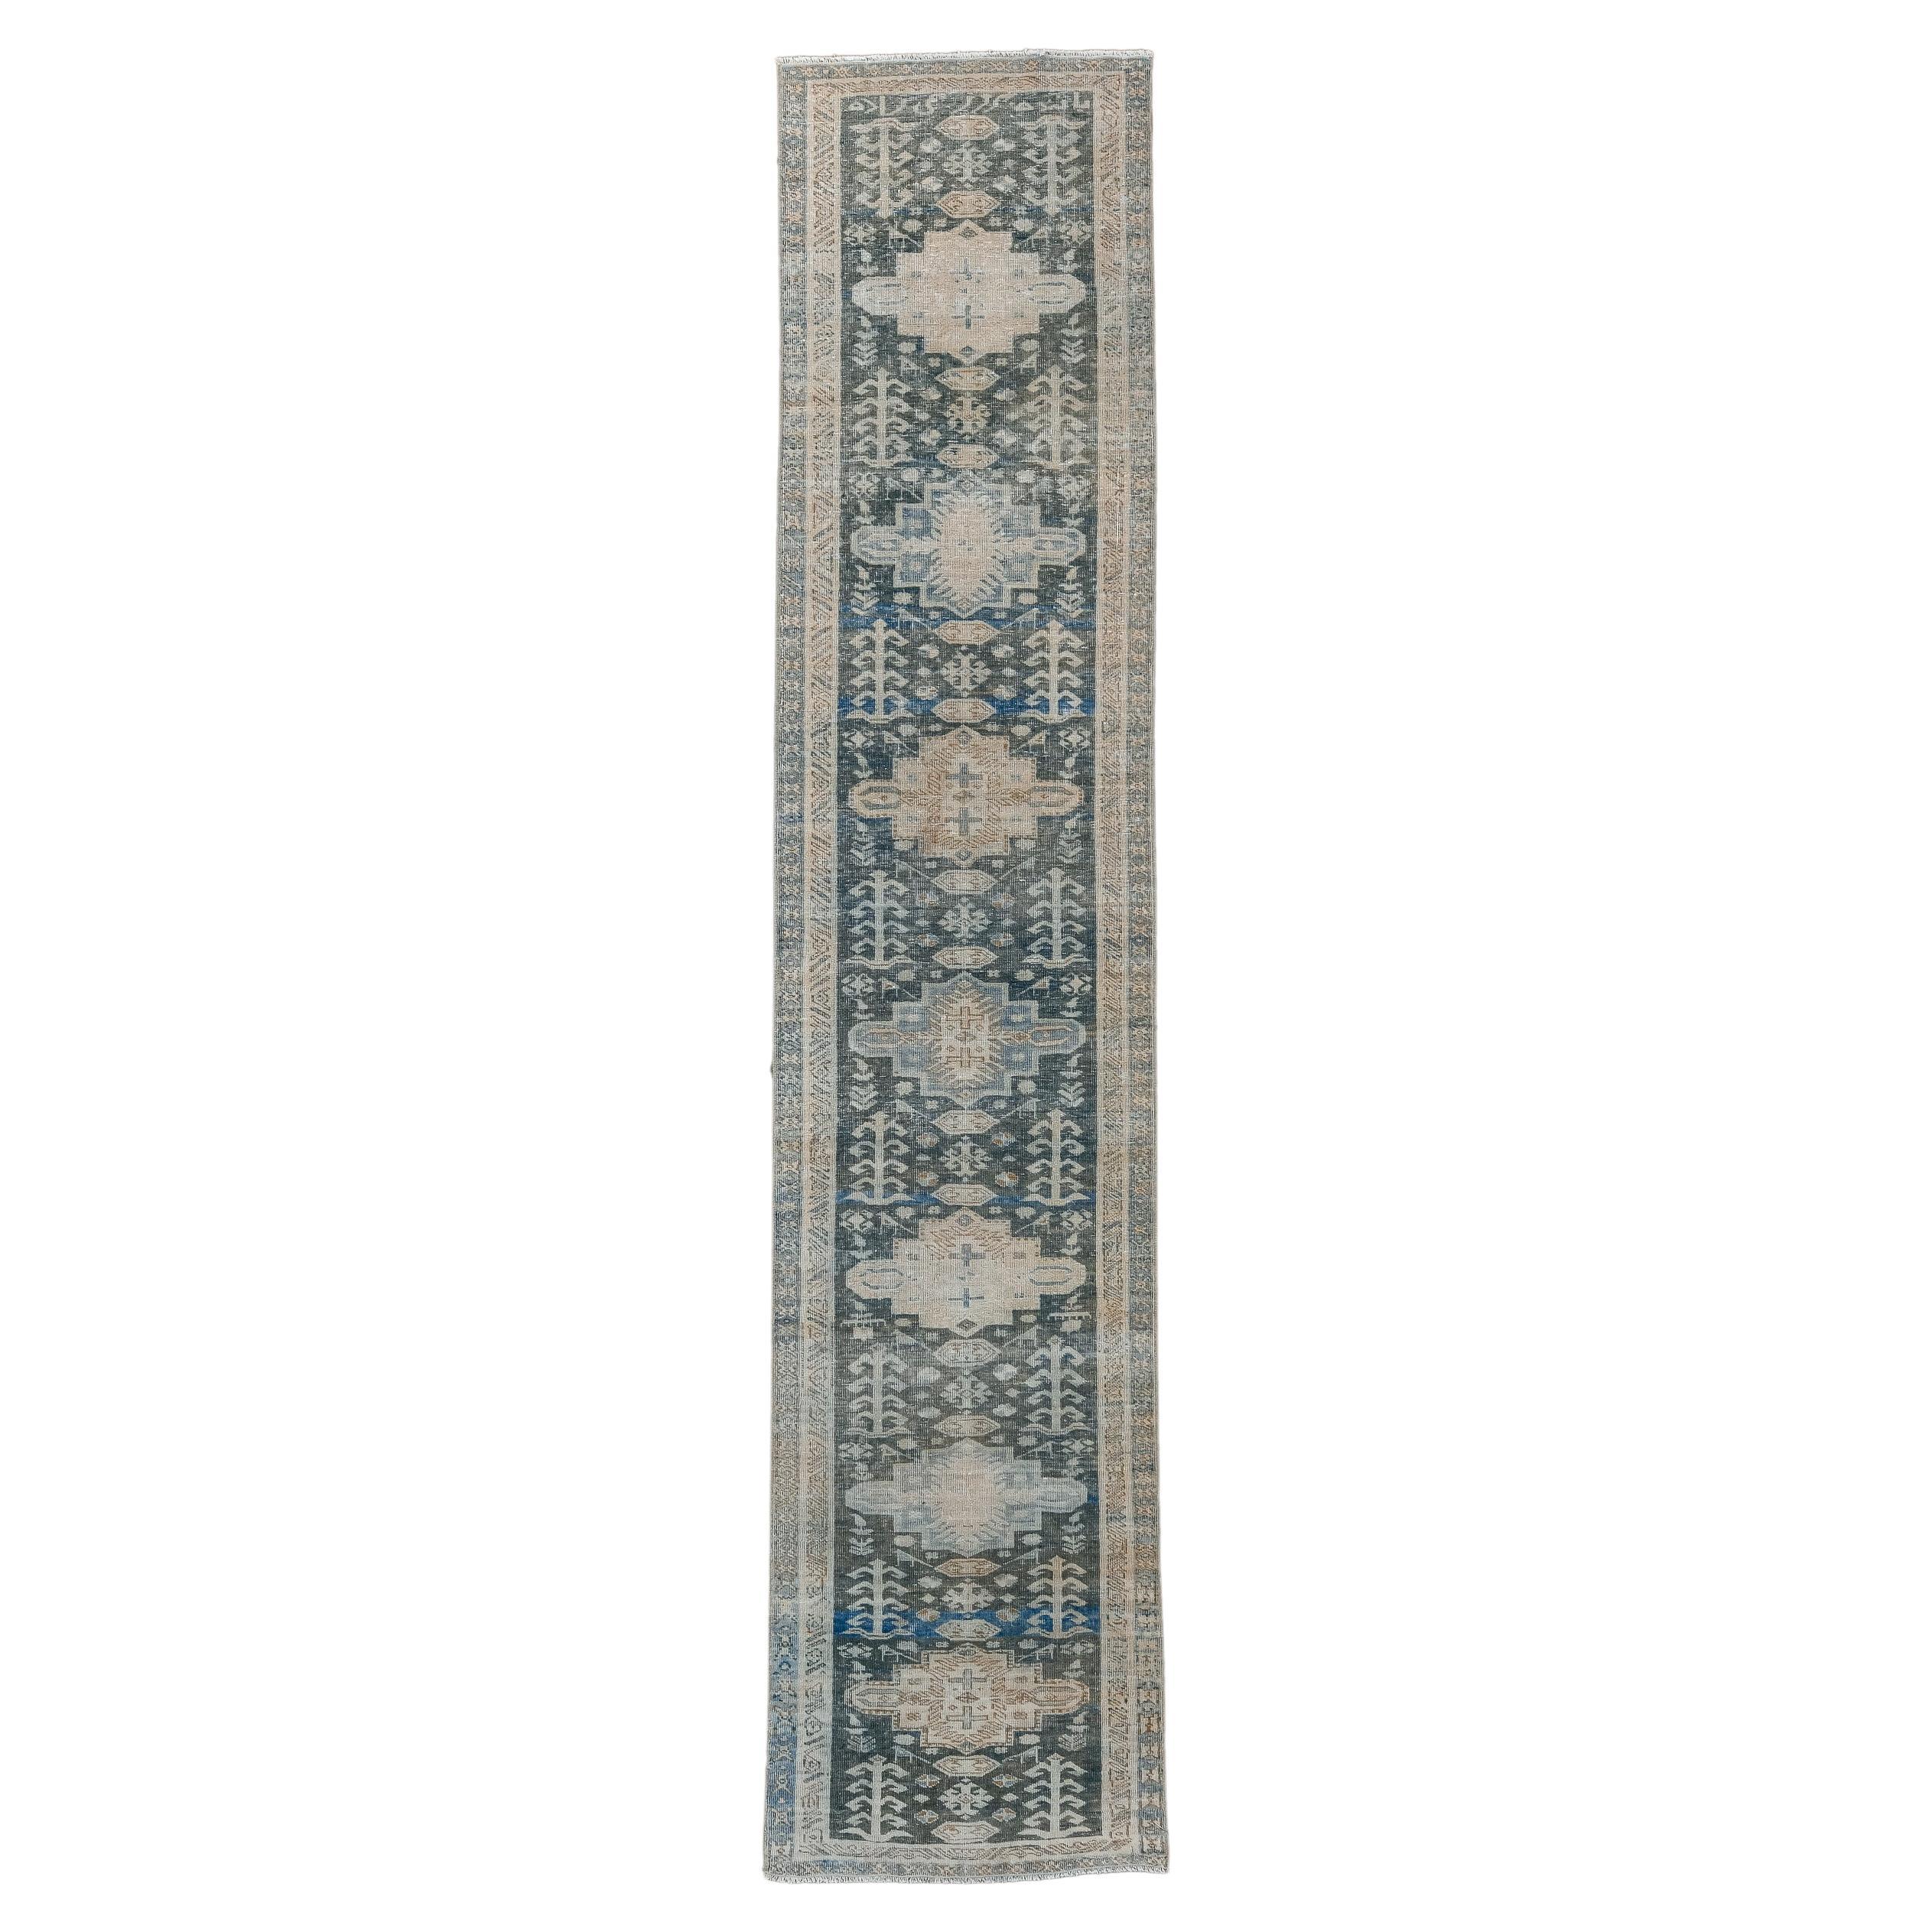 Antique Heriz Runner with Blue Field and Ivory Border